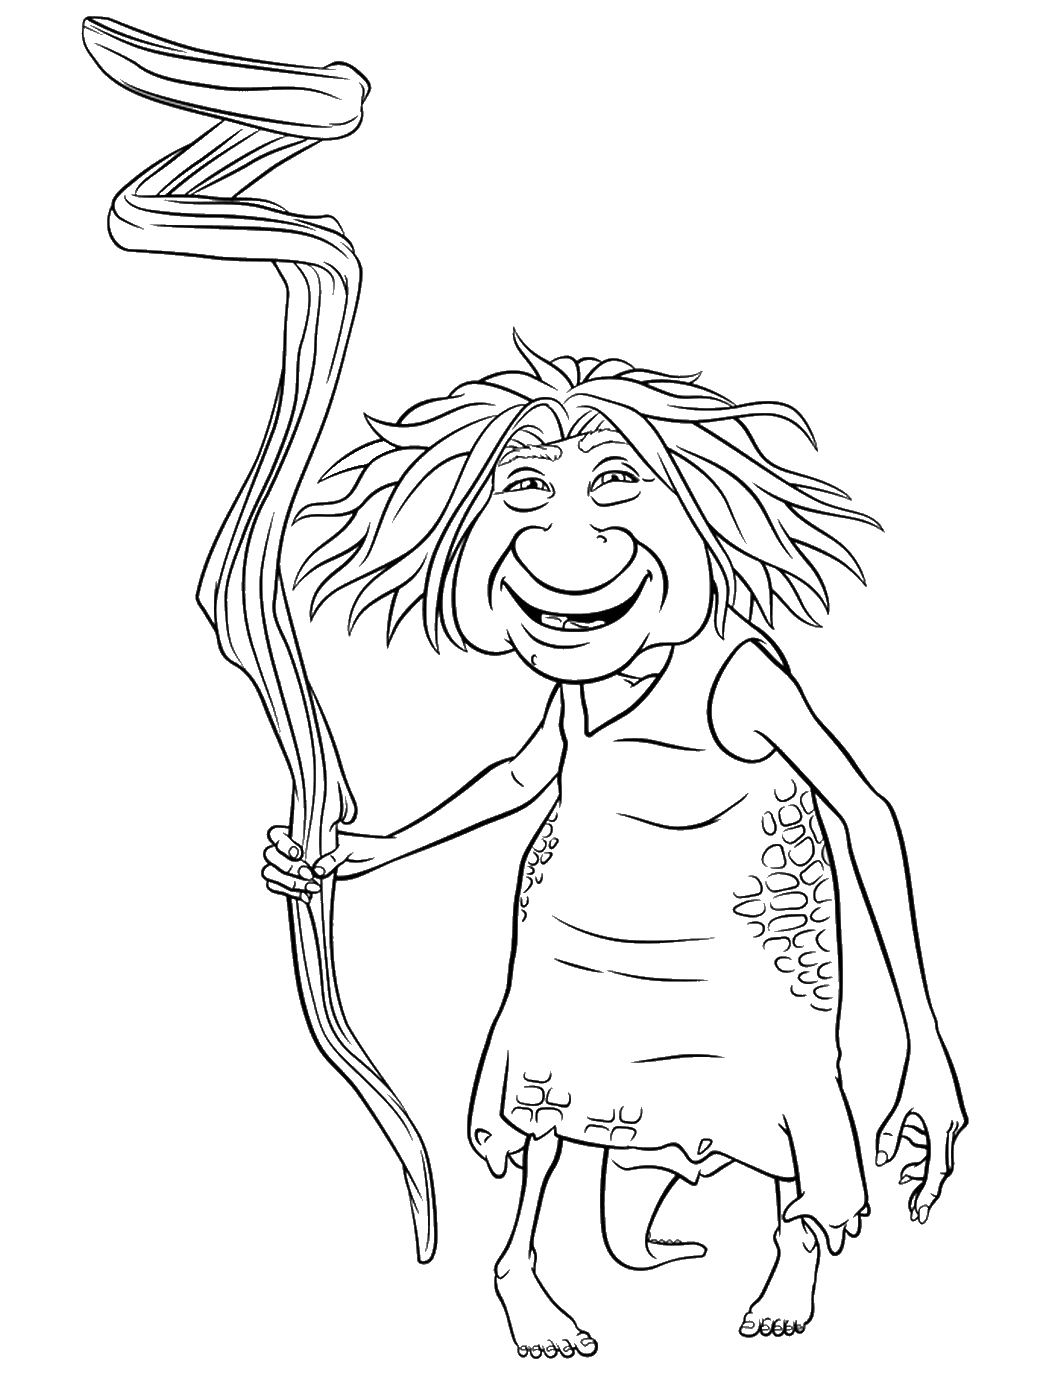 The Croods Coloring Pages TV Film croods_cl_151 Printable 2020 08585 Coloring4free